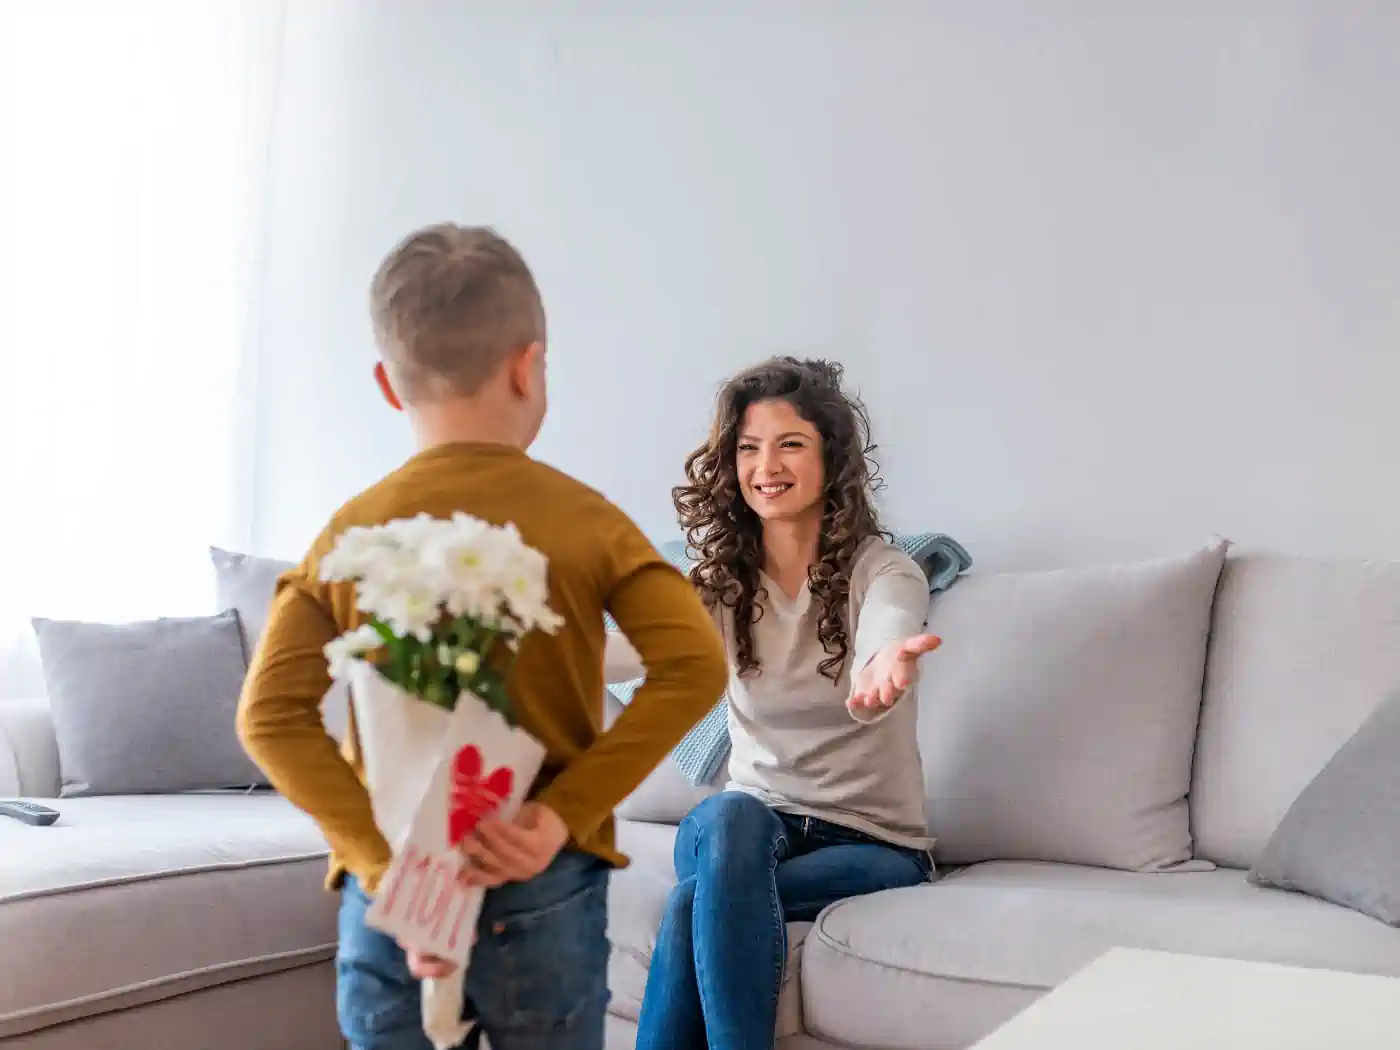 A young boy surprising his mother with a bouquet of white flowers, hidden behind his back. Fabulous Flowers and Gifts. Mother's Day Flowers.